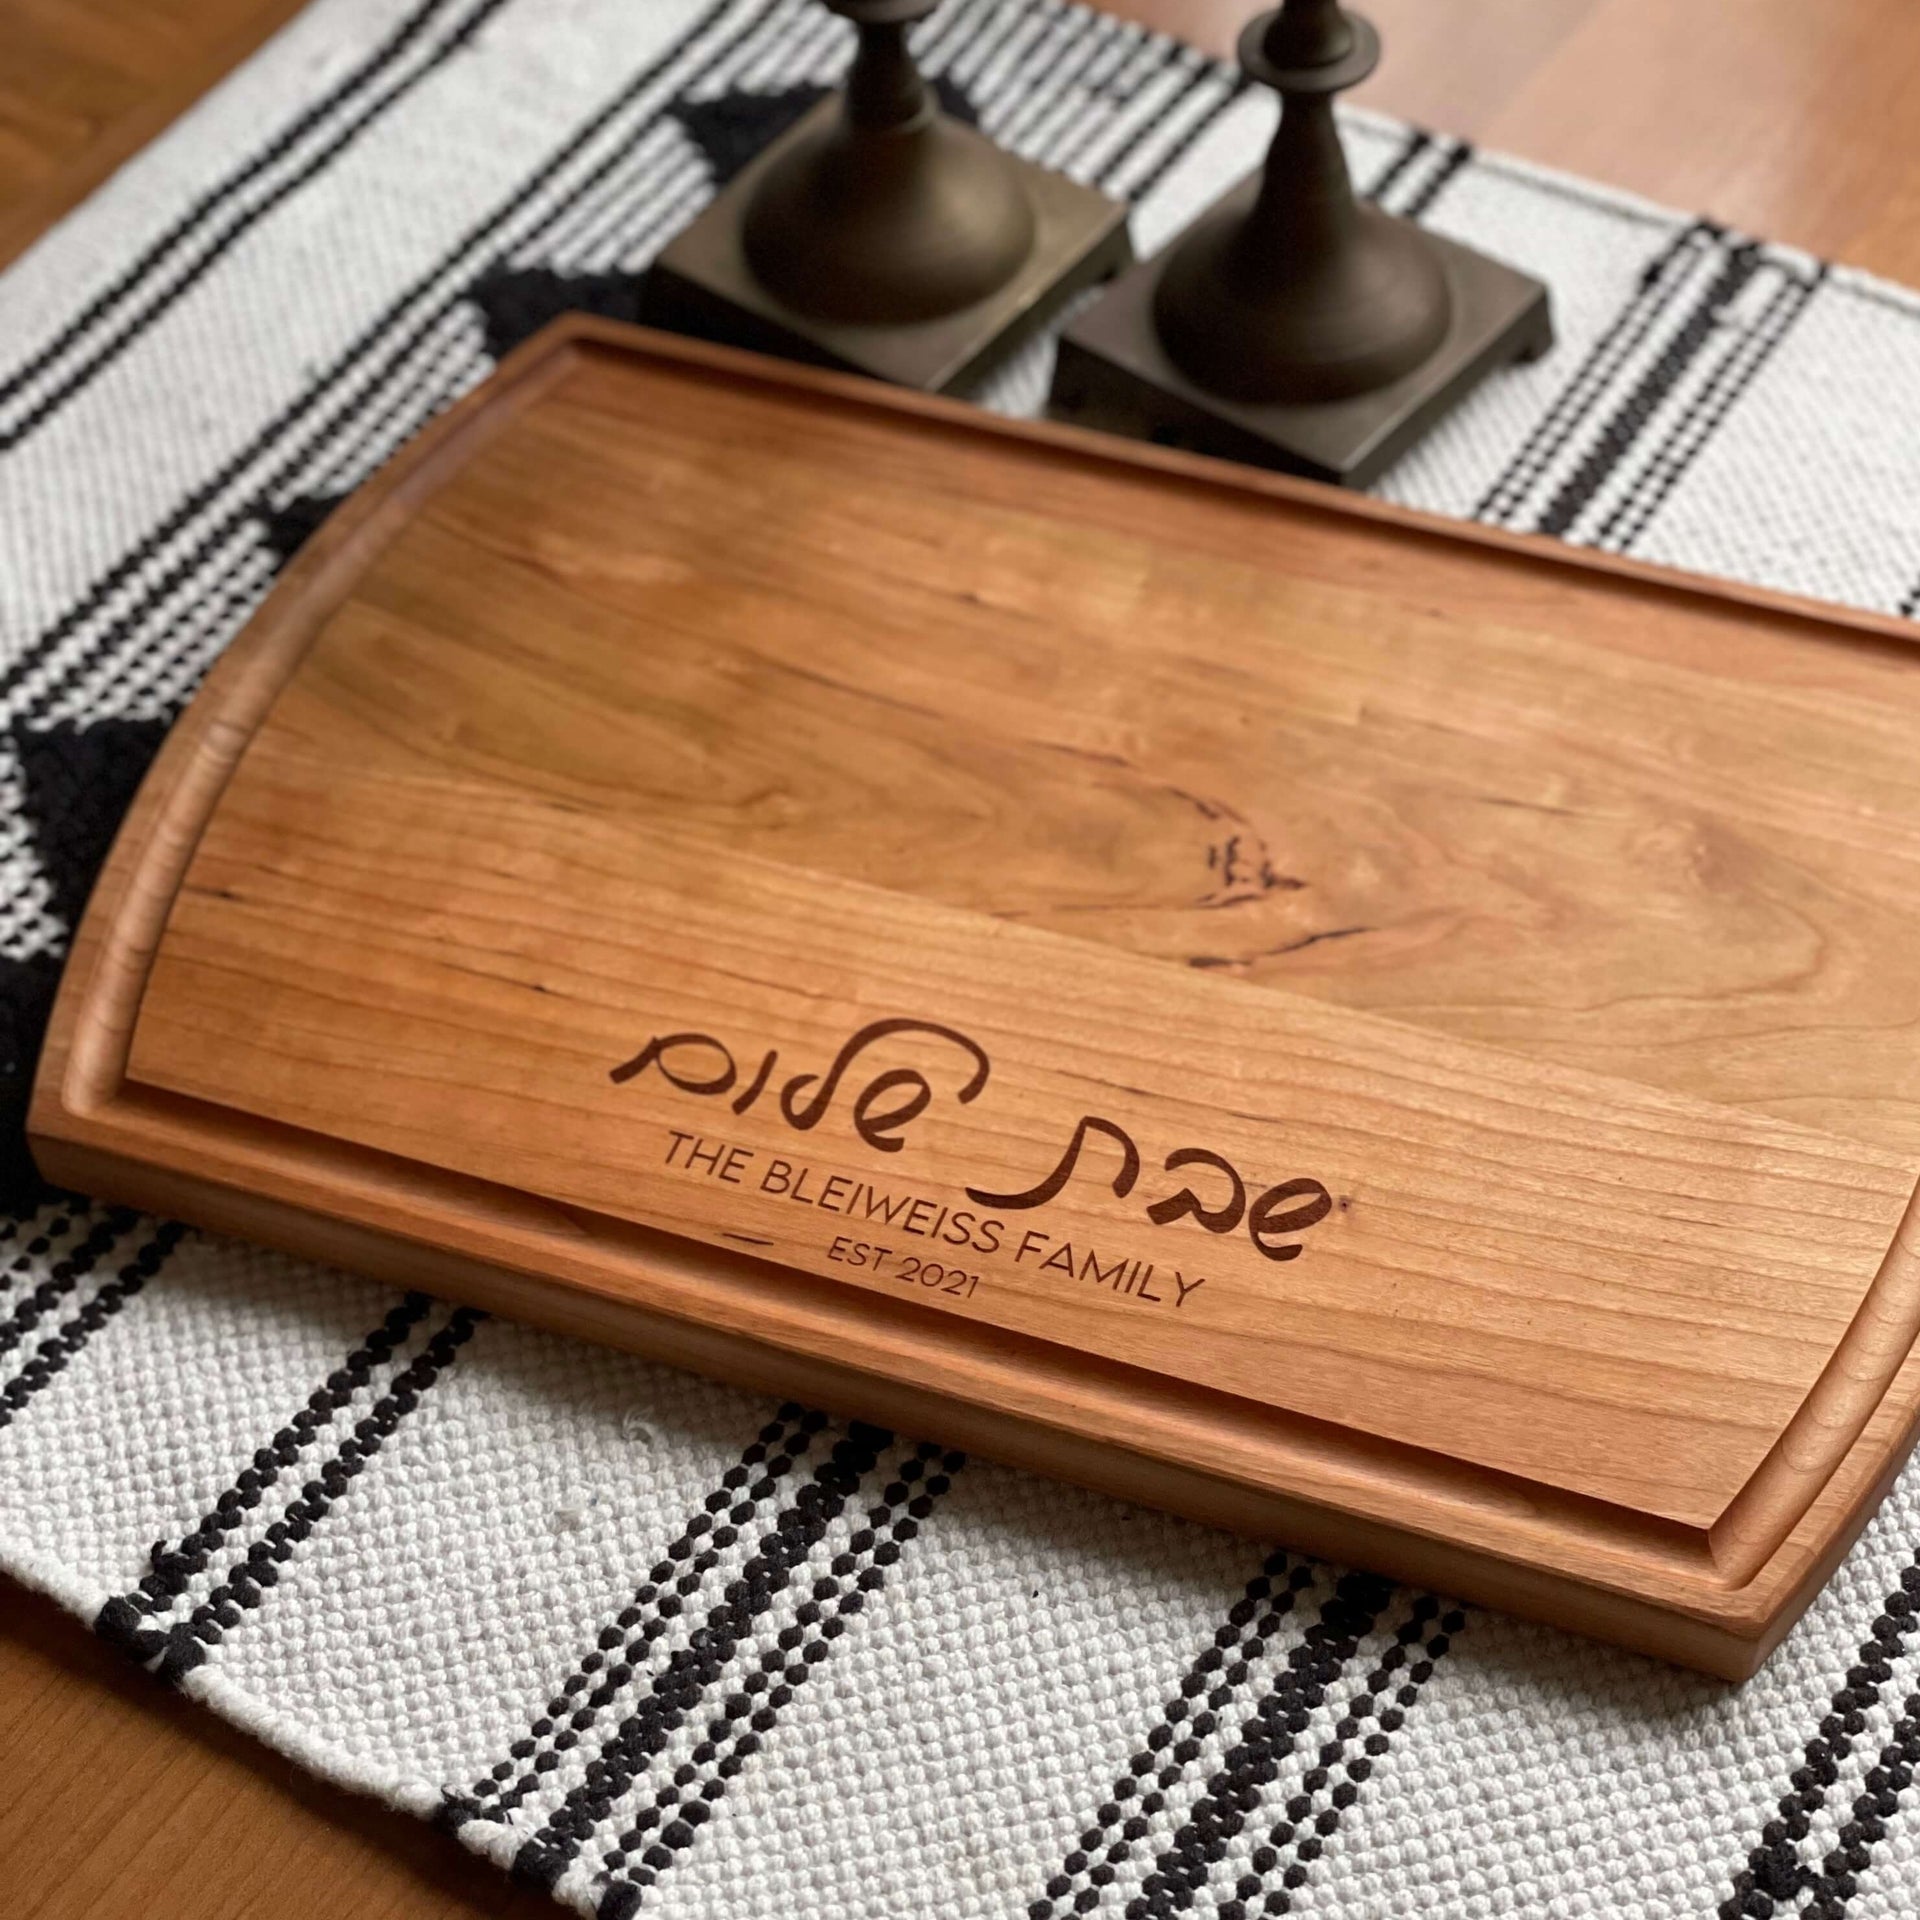 Cutting Board - Maple Board with Handle - Bar Size - Personalized Gallery